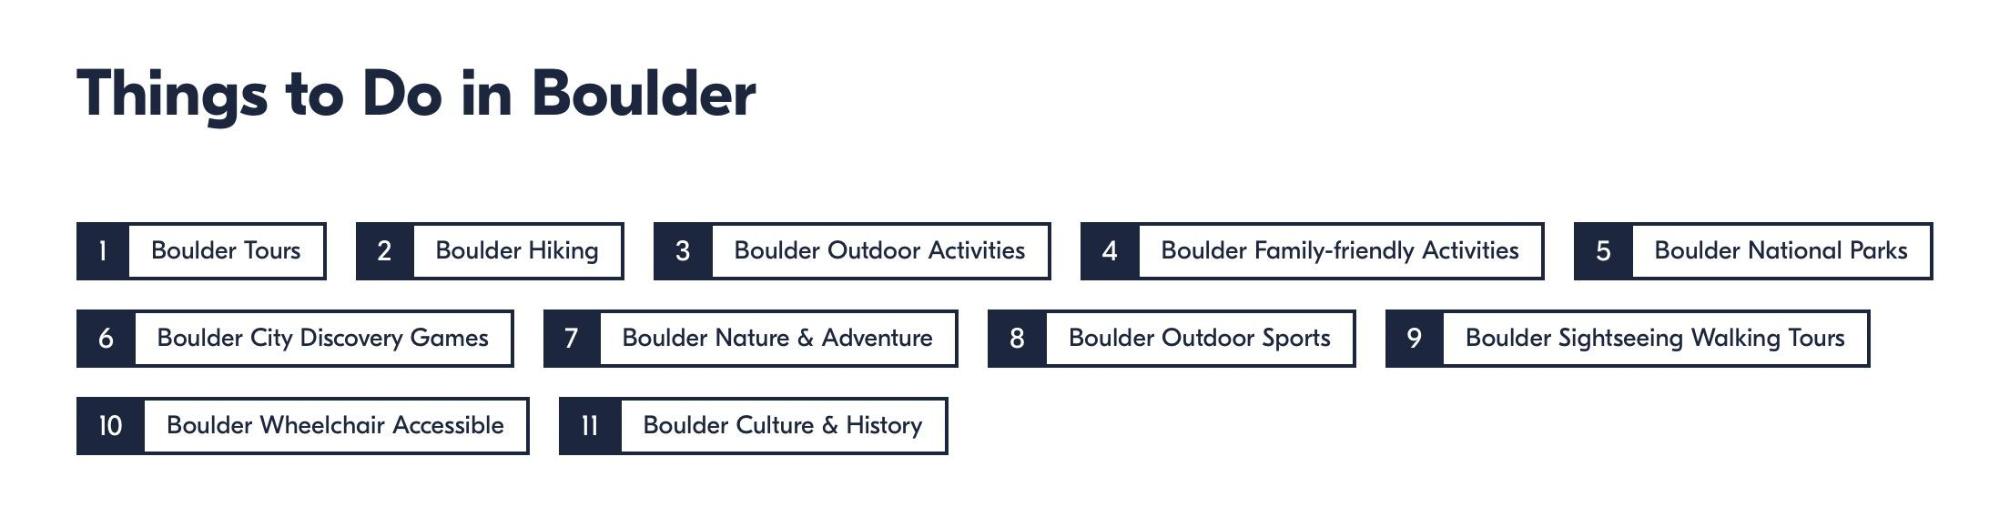 Things to do in Boulder—automated internal links